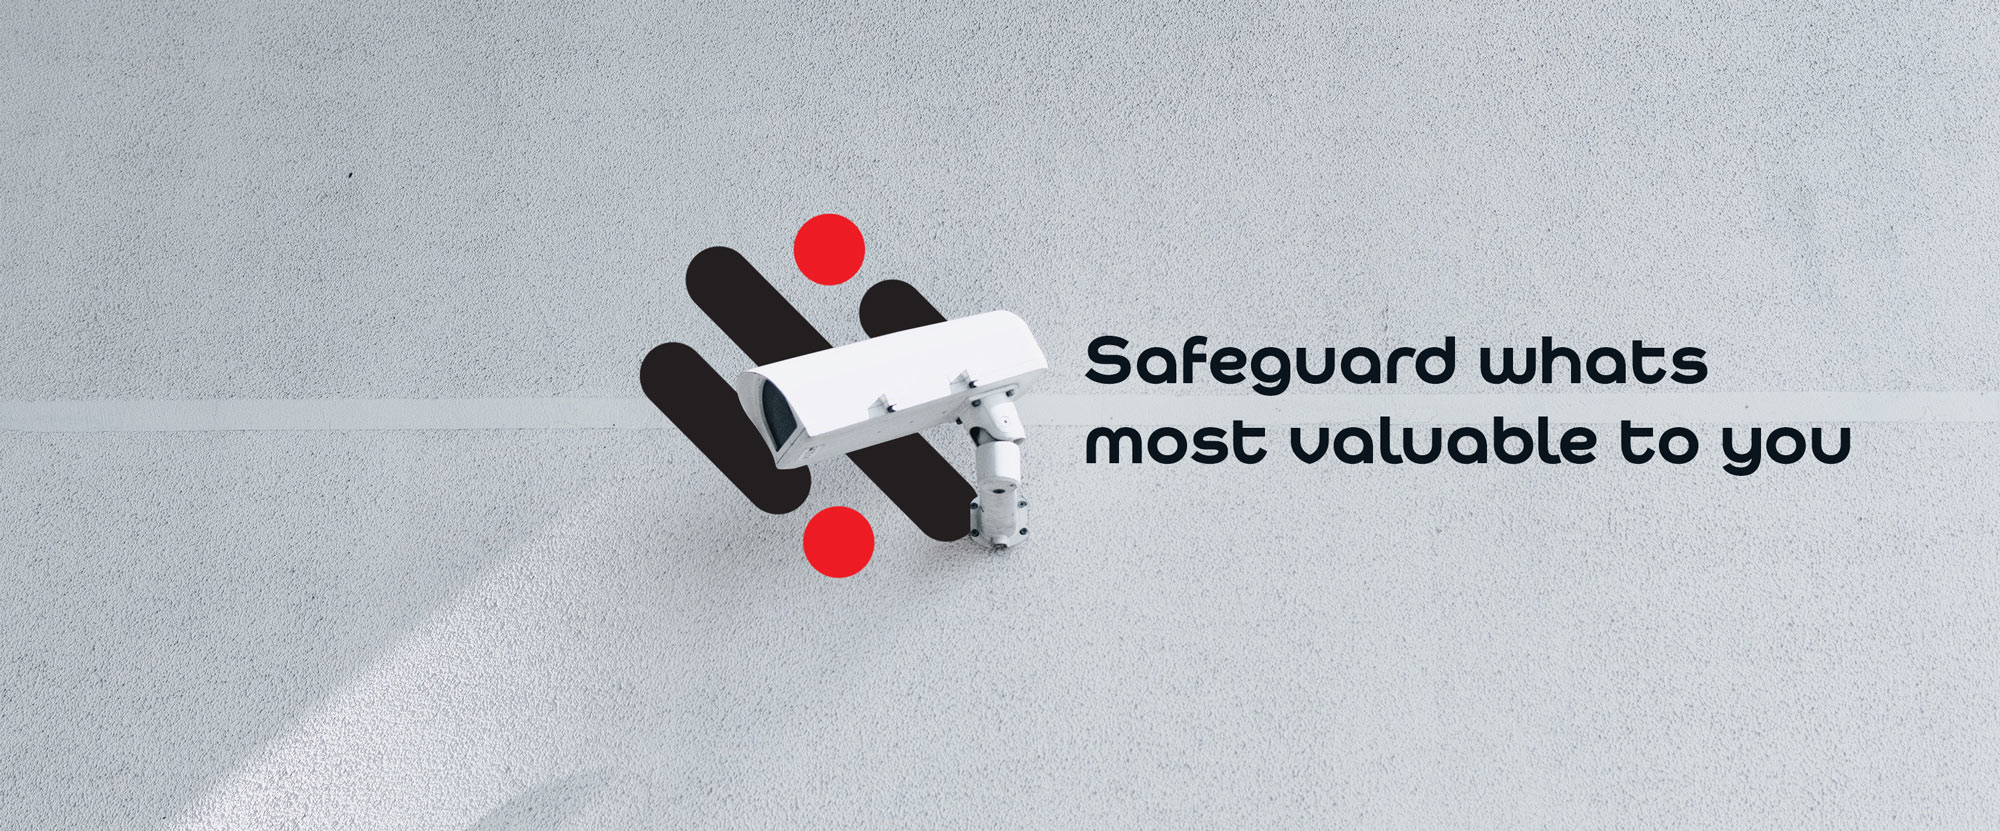 Safeguard whats most valuable to you